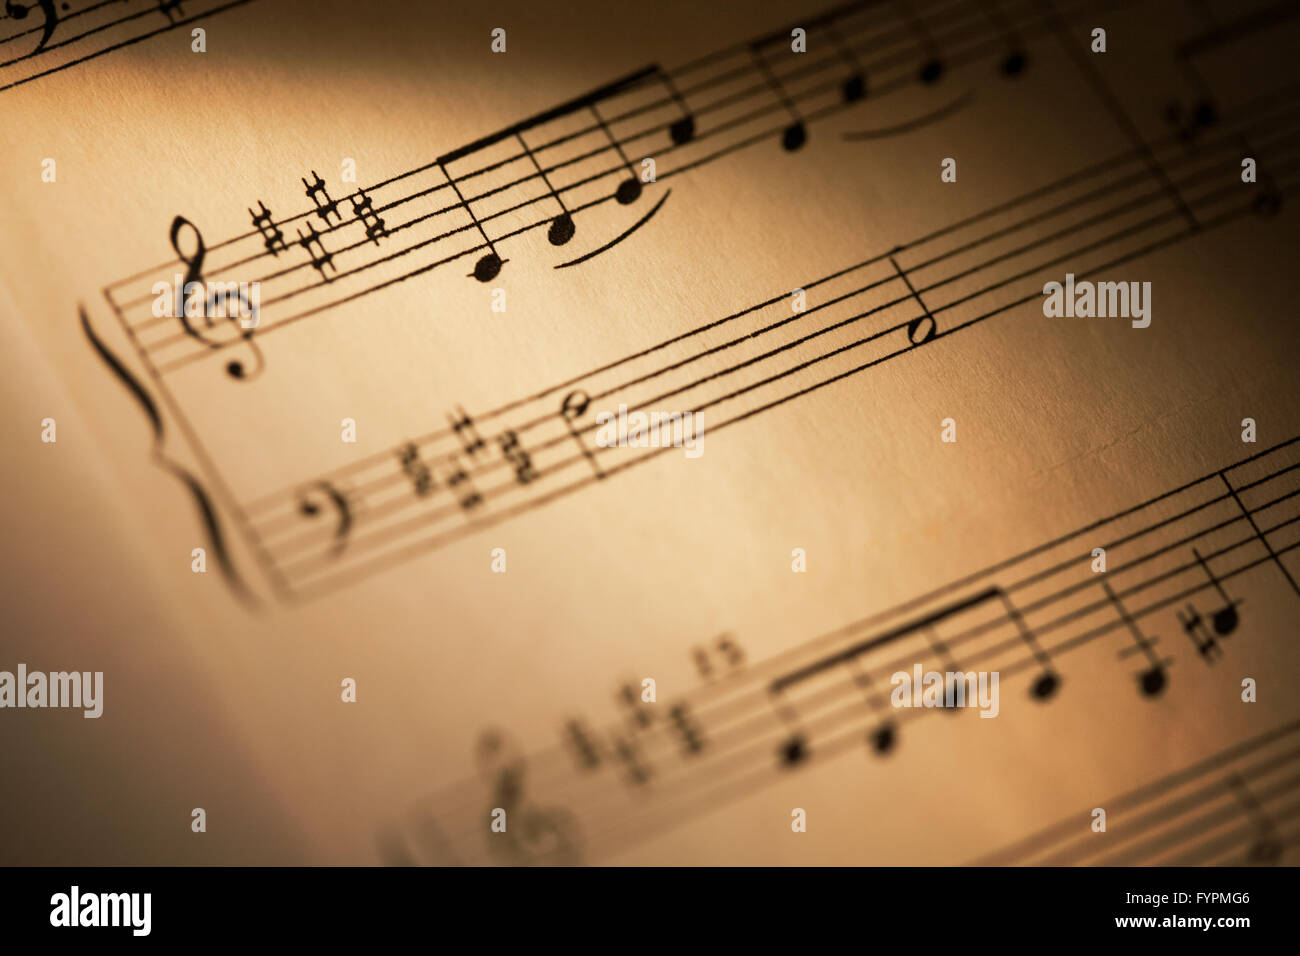 Sheet music detail, notation from a composition over 100 years old. Stock Photo